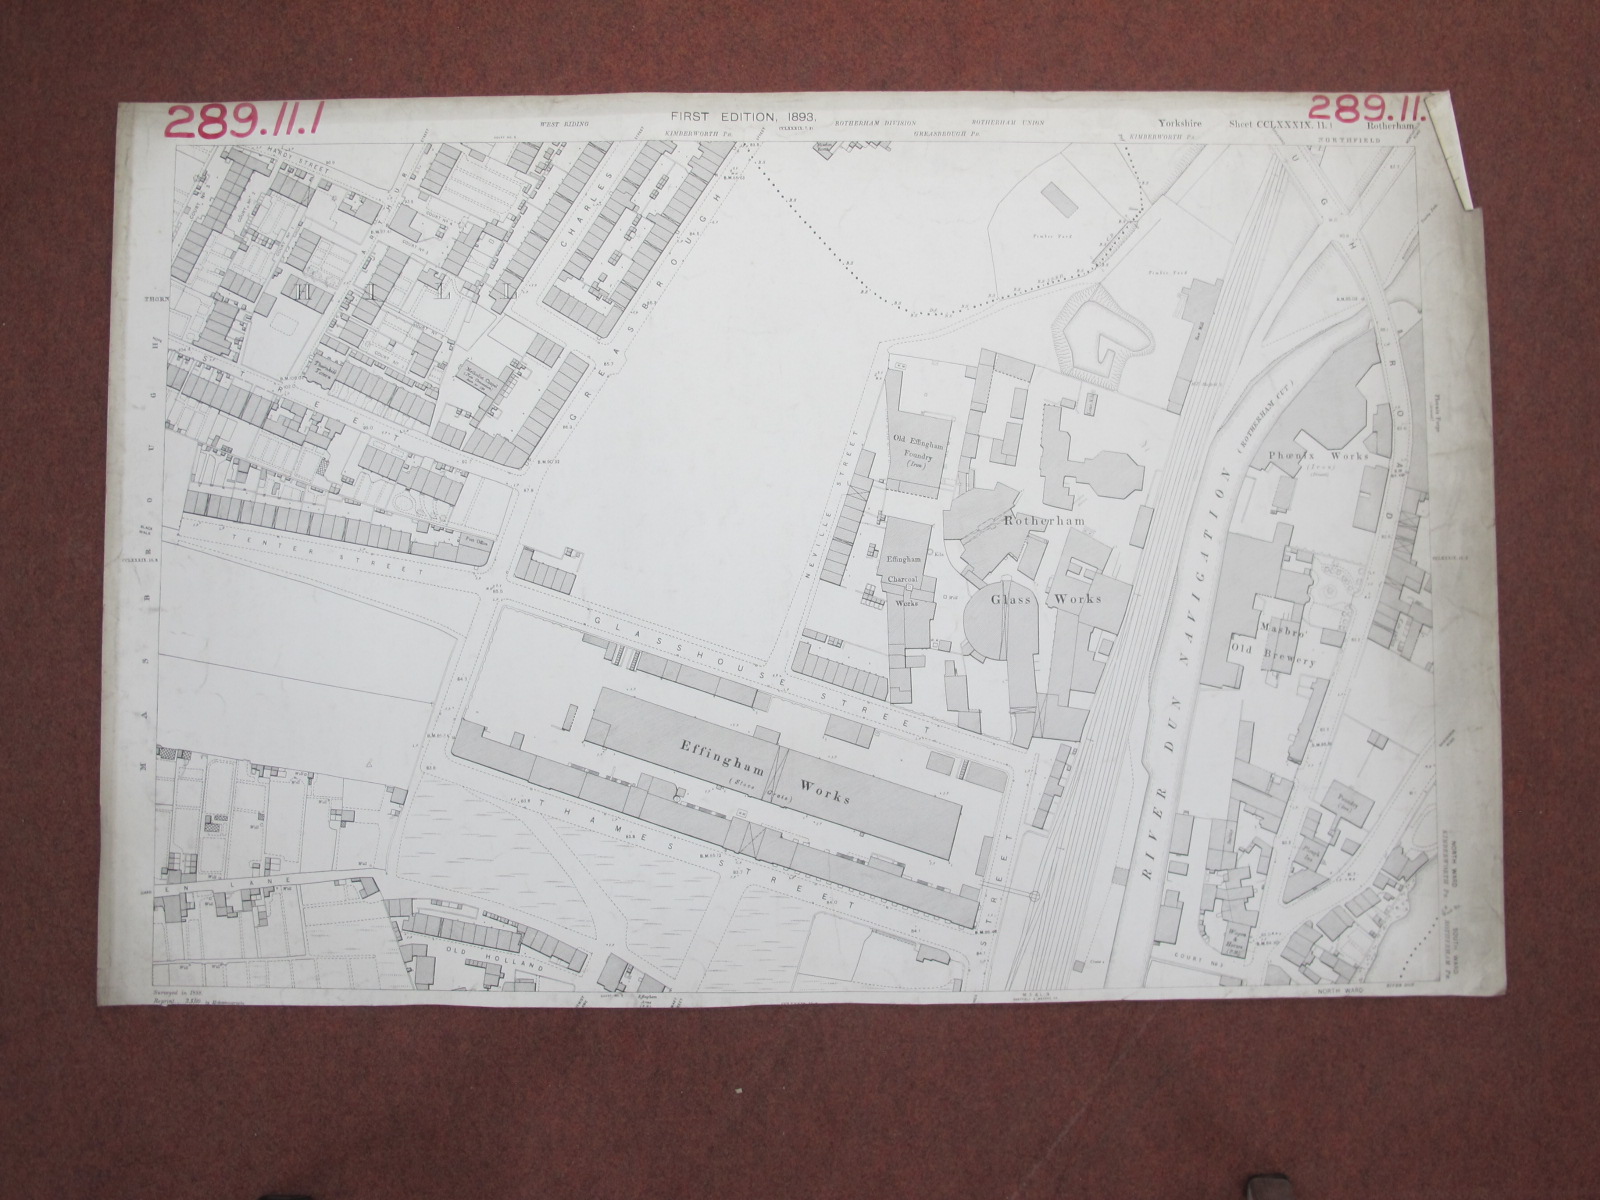 West Riding Yorkshire Maps, Rotherham and area, some dates noted, 1893, 1903, 1906, 1936, various - Image 3 of 11